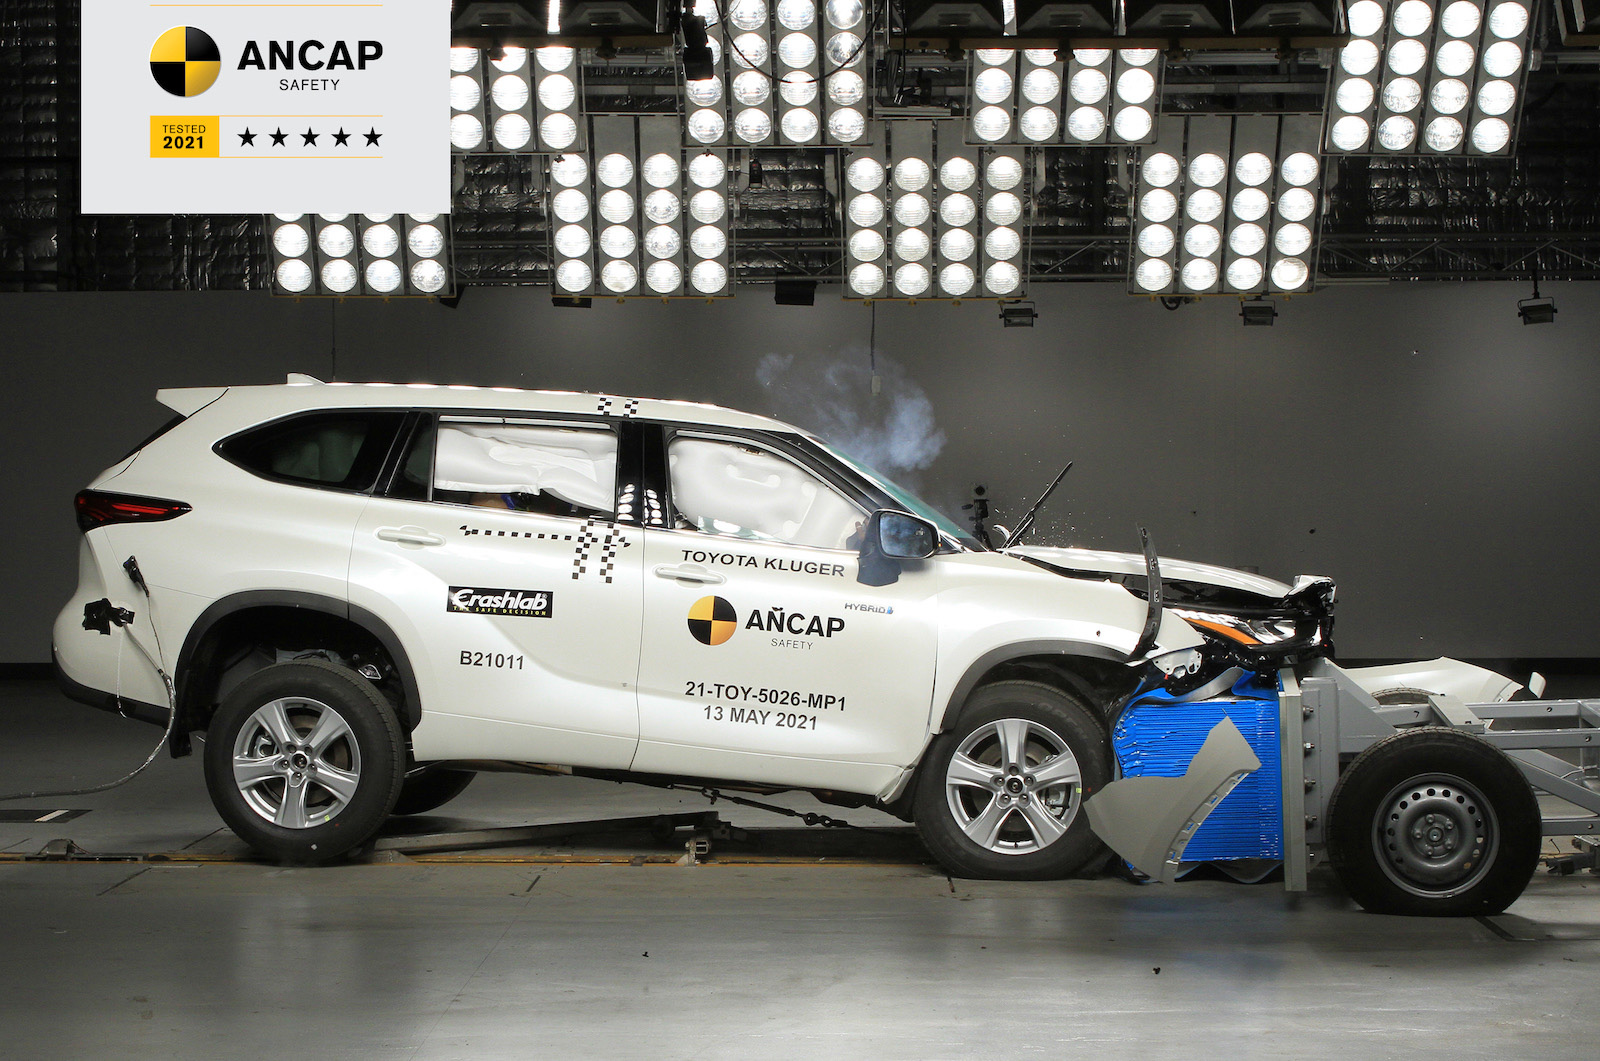 2021 Toyota Kluger scores 5-star ANCAP safety rating (video)